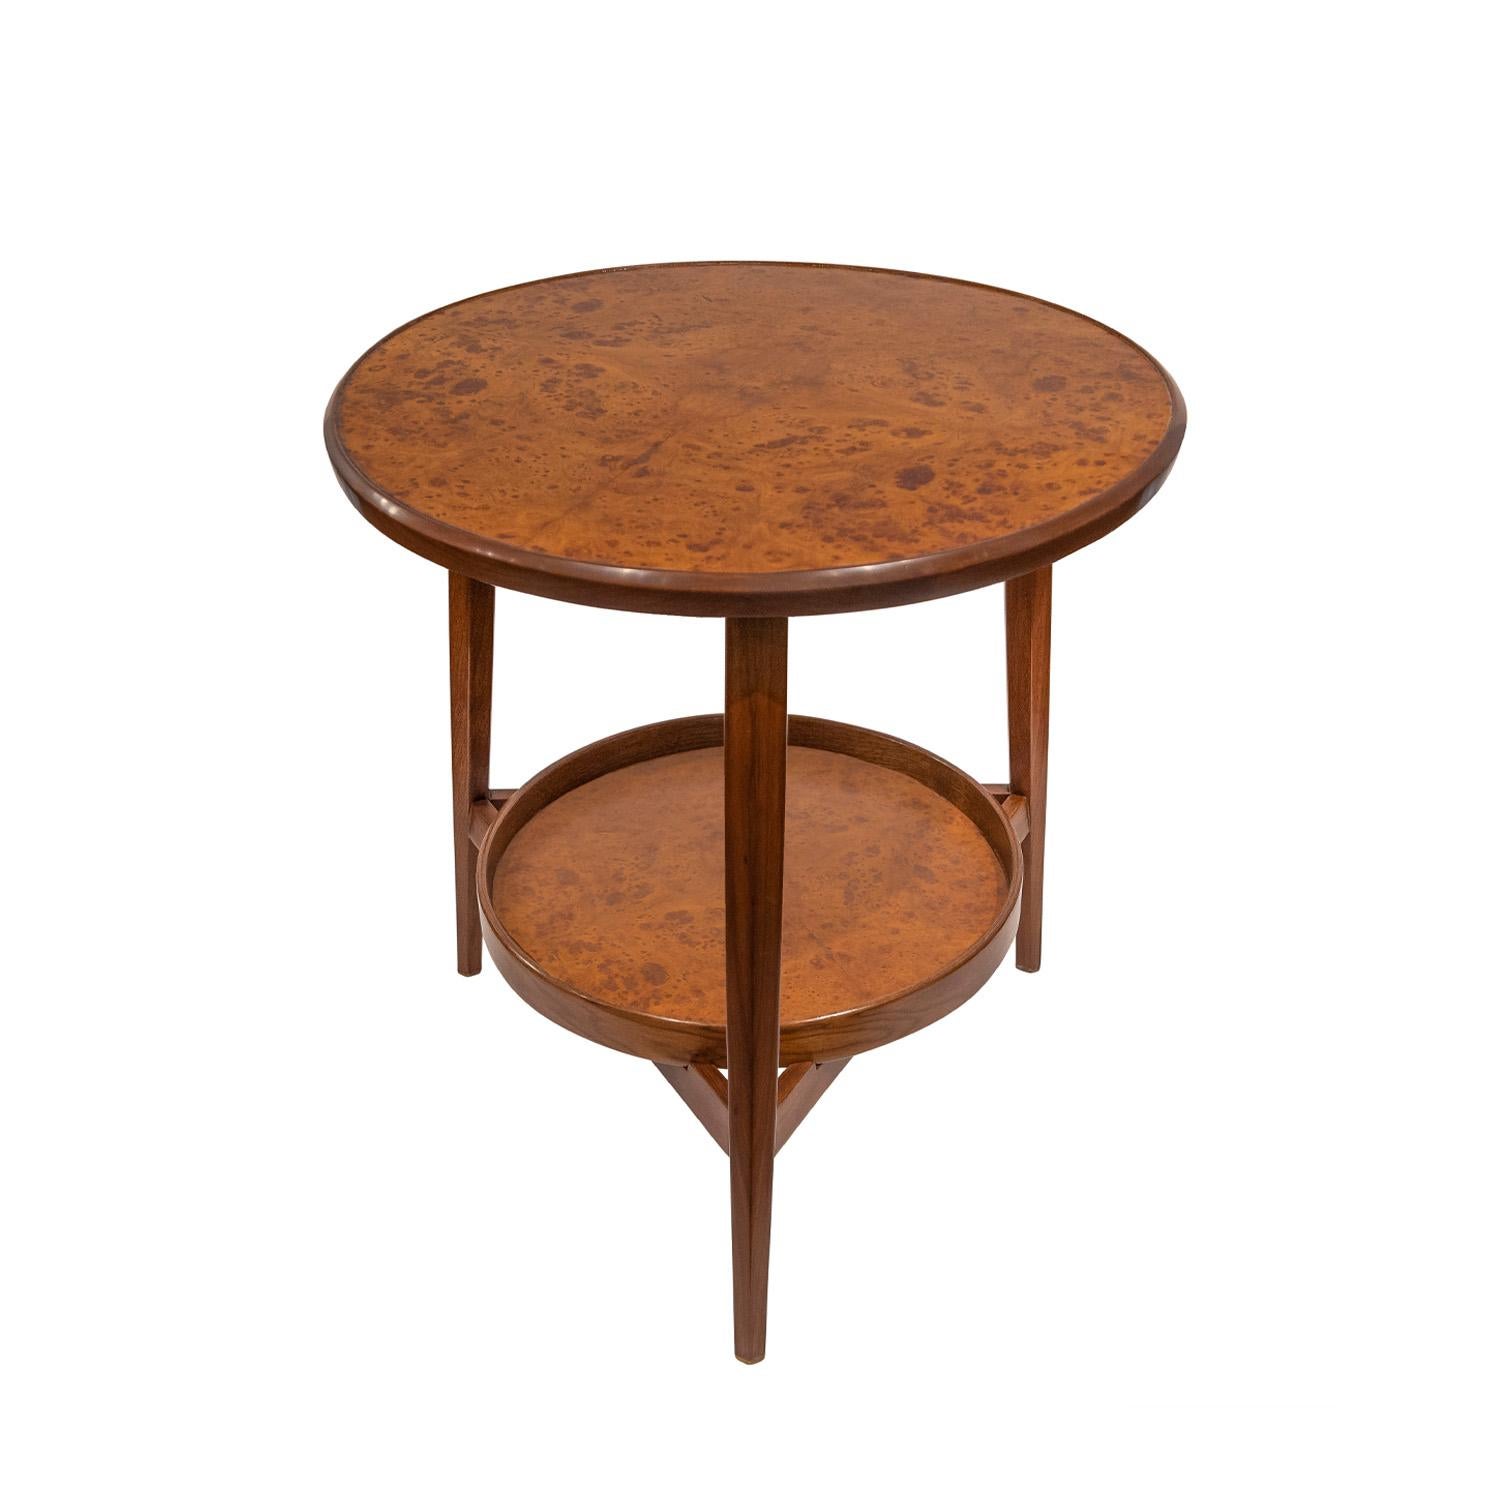 Rare side table in book-matched Carpathian elm and walnut with removable serving tray at bottom by Edward Wormley for Dunbar, American 1950's (signed with metal label).  This table has beautiful little brass sabots at the bottom of the legs.  The